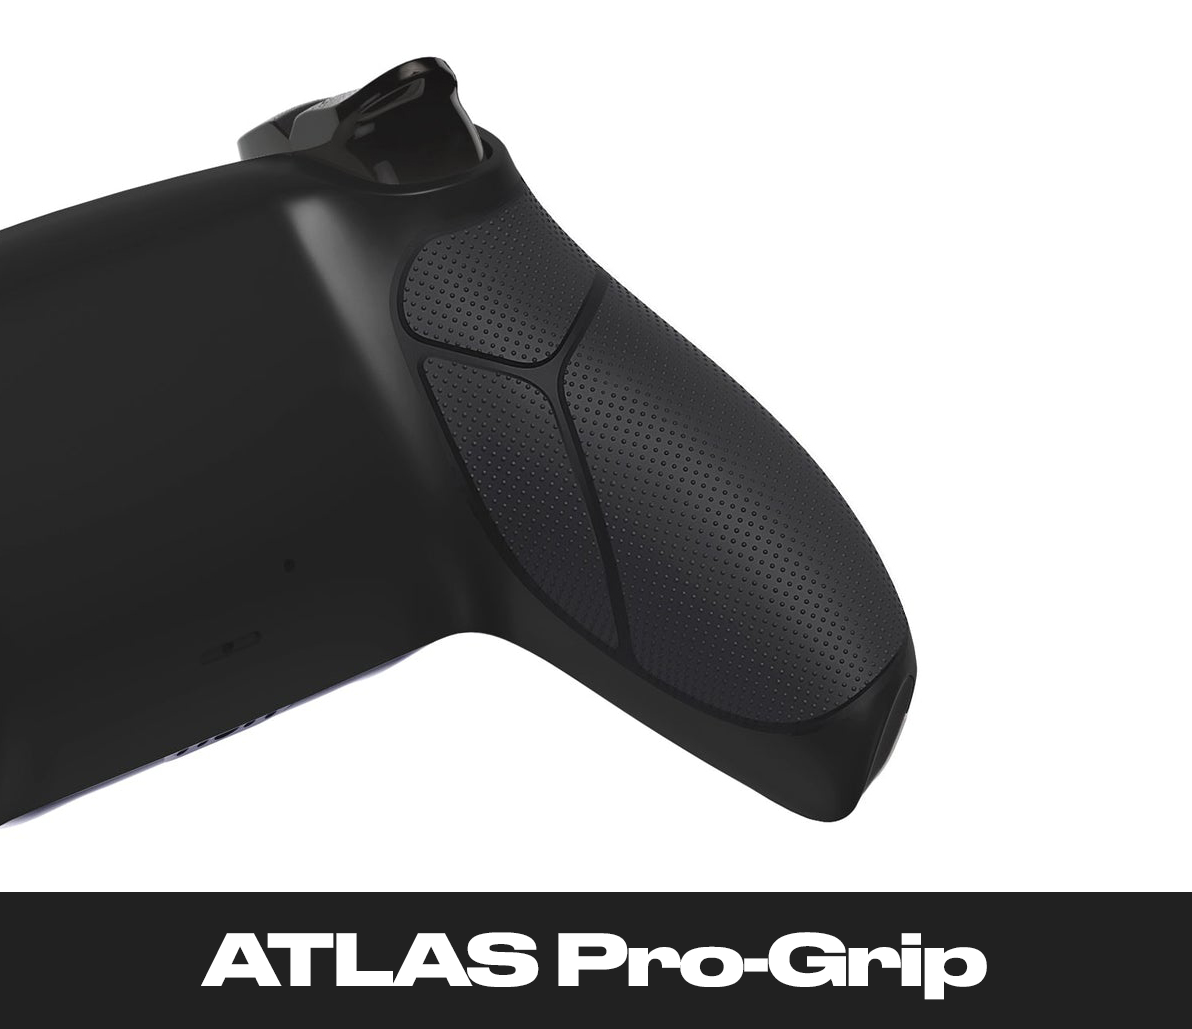 PS5 Pro Controller with Hall Effect Sticks and Paddles 'Midnight Black'